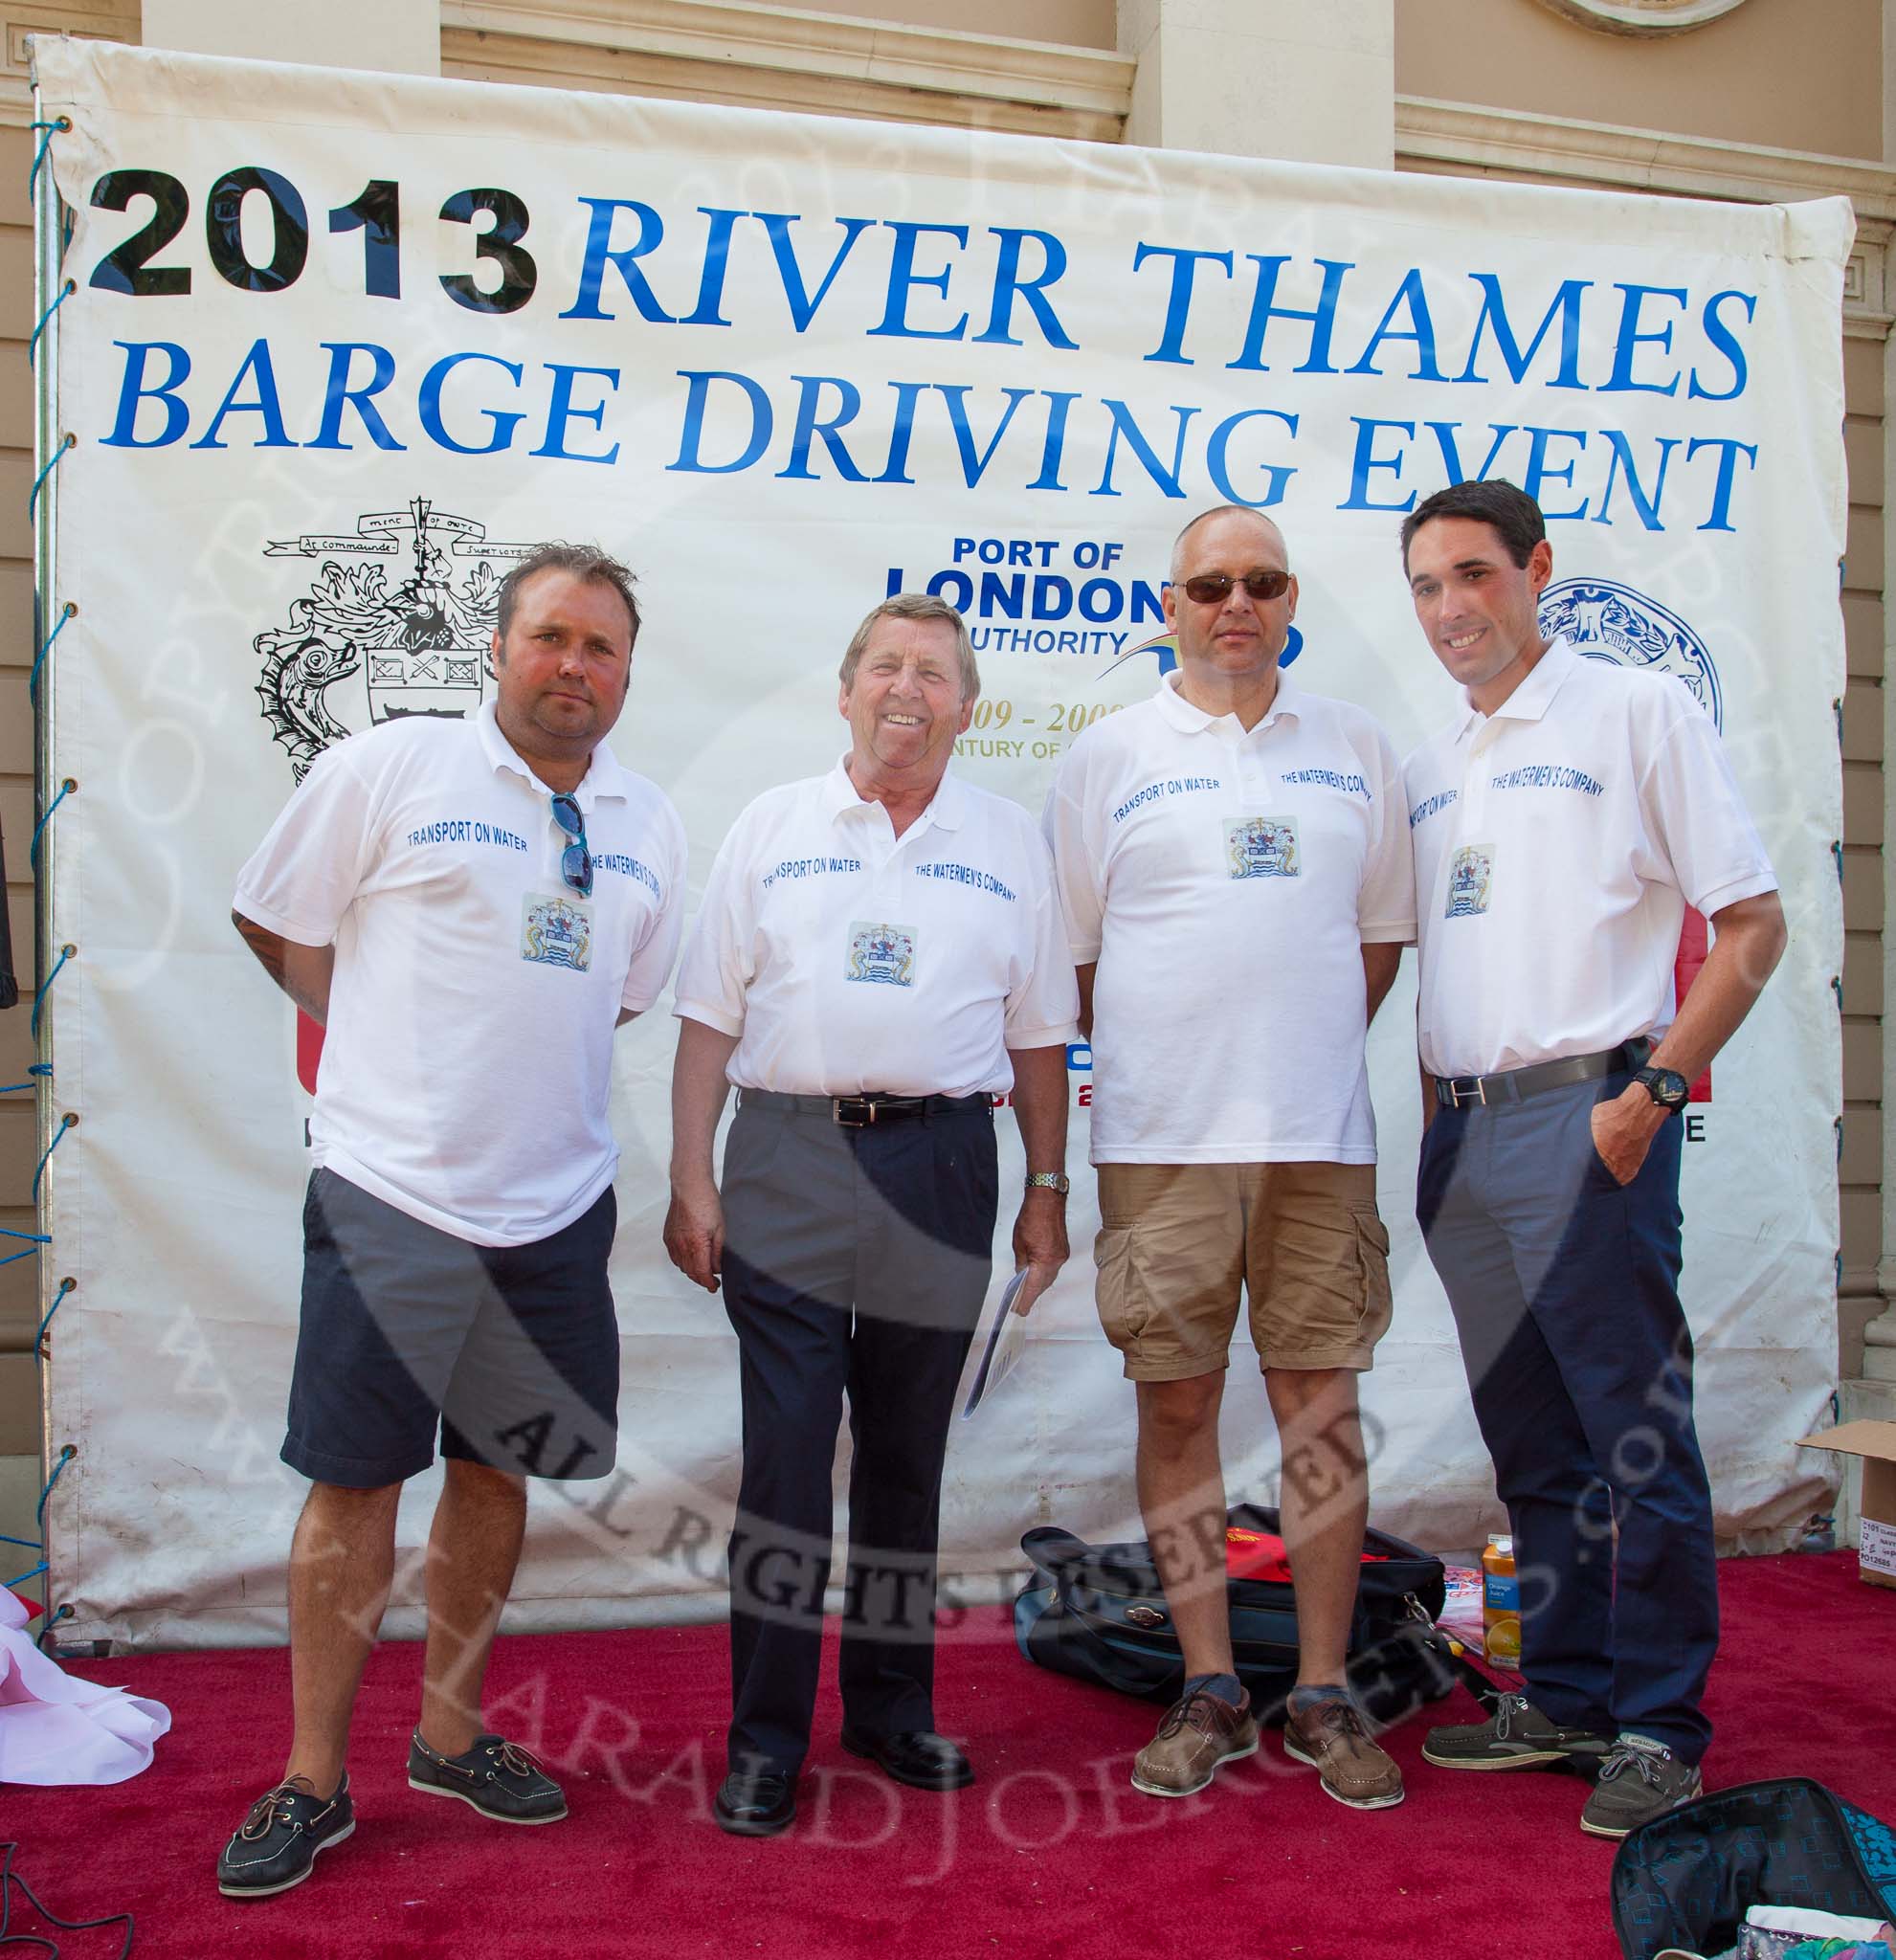 TOW River Thames Barge Driving Race 2013.
River Thames between Greenwich and Westminster,
London,

United Kingdom,
on 13 July 2013 at 10:09, image #16